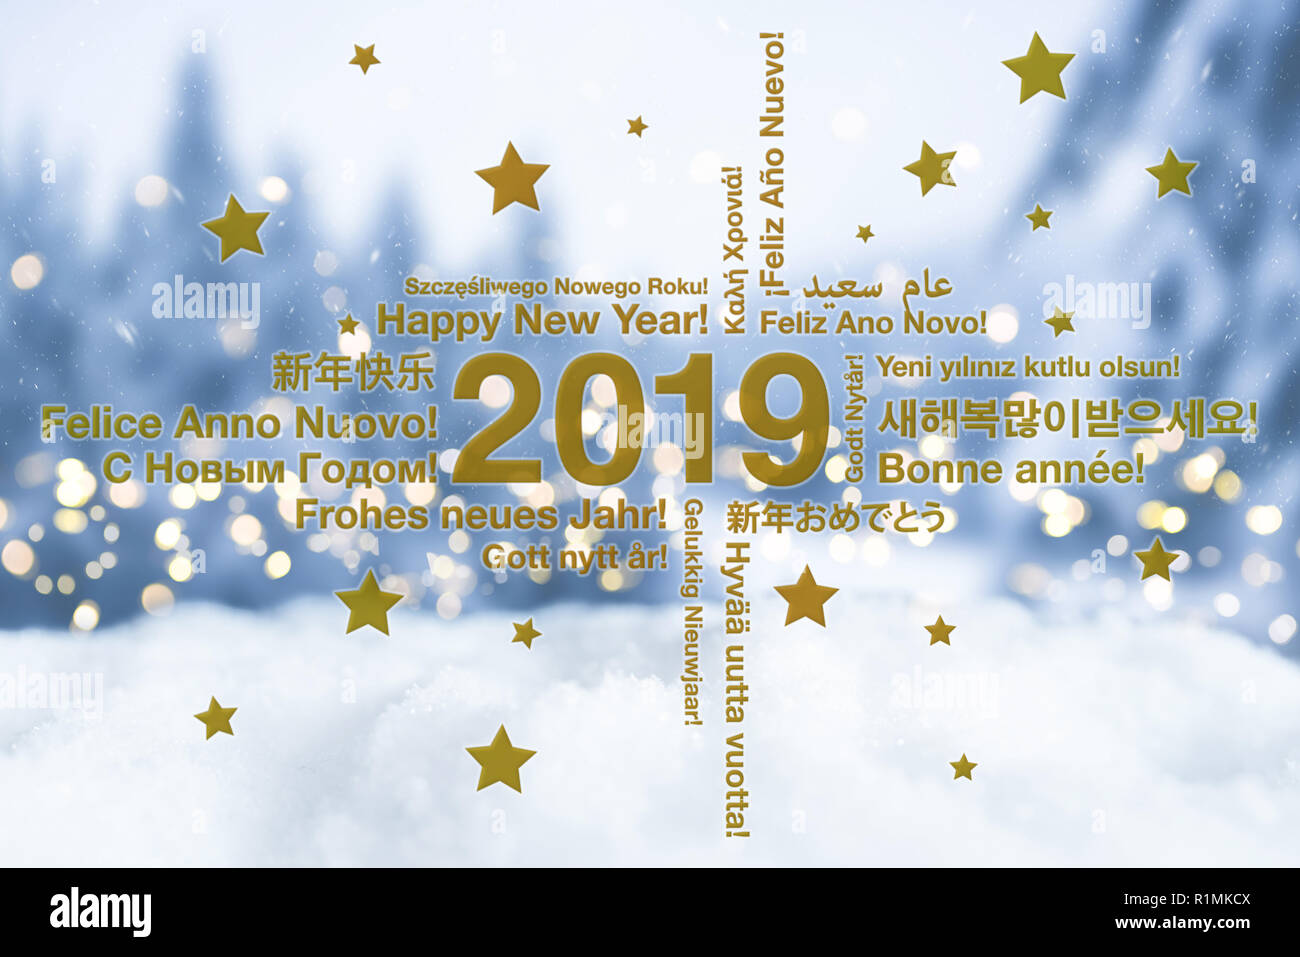 Happy New Year in different languages greeting card with snowy winter landscape in blured background Stock Photo